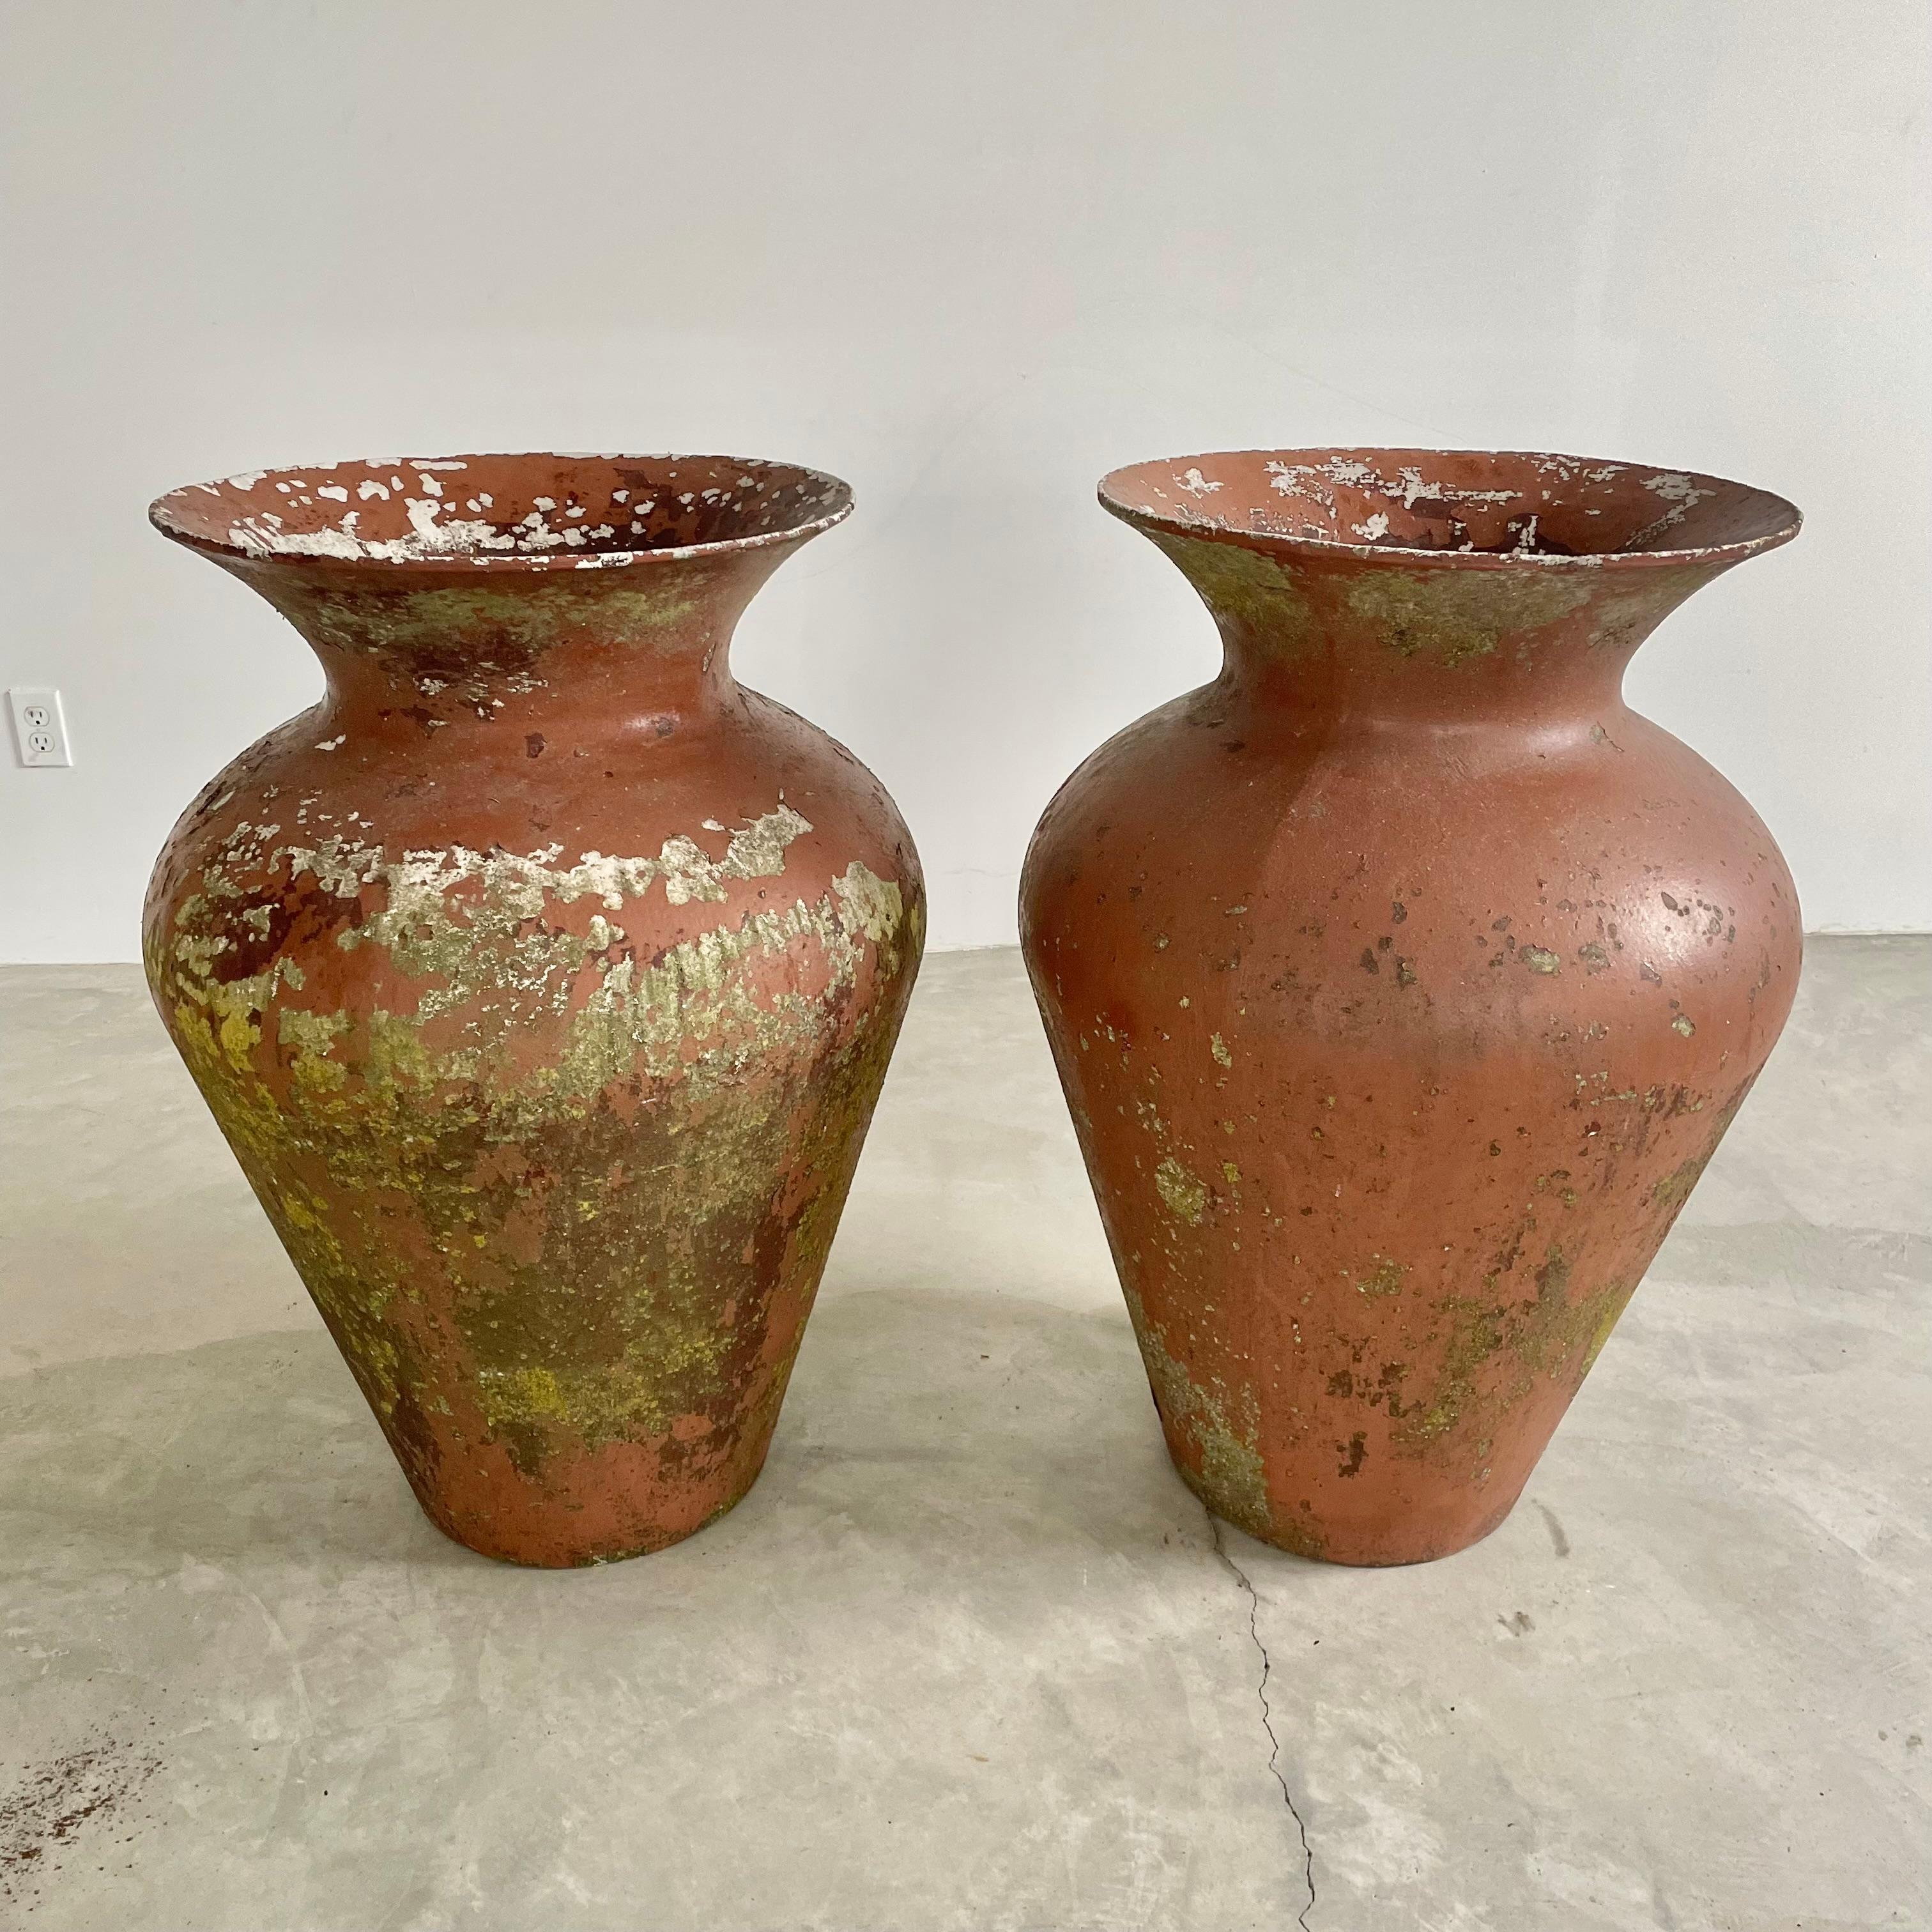 Immense concrete vase by Willy Guhl in an adobe patina. Extremely rare model. Made of fiber cement. Decades of patina, moss and paint. Colors vary from adobe and white to green and dark brown. Absolutely stunning presence with impeccable design and